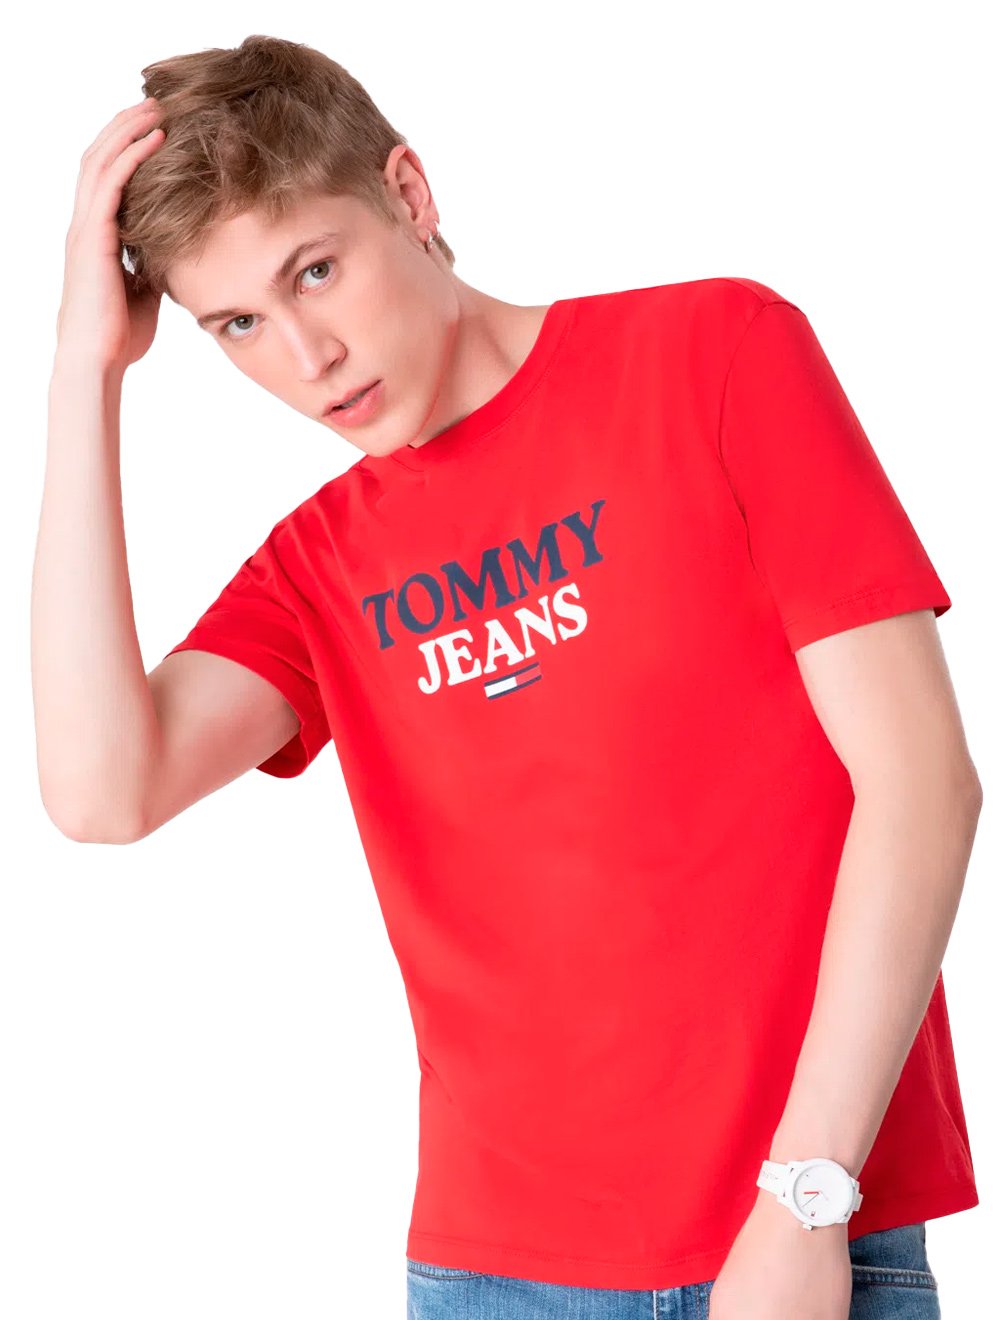 Camiseta Tommy Jeans Masculina Center Entry Graphic Vermelha